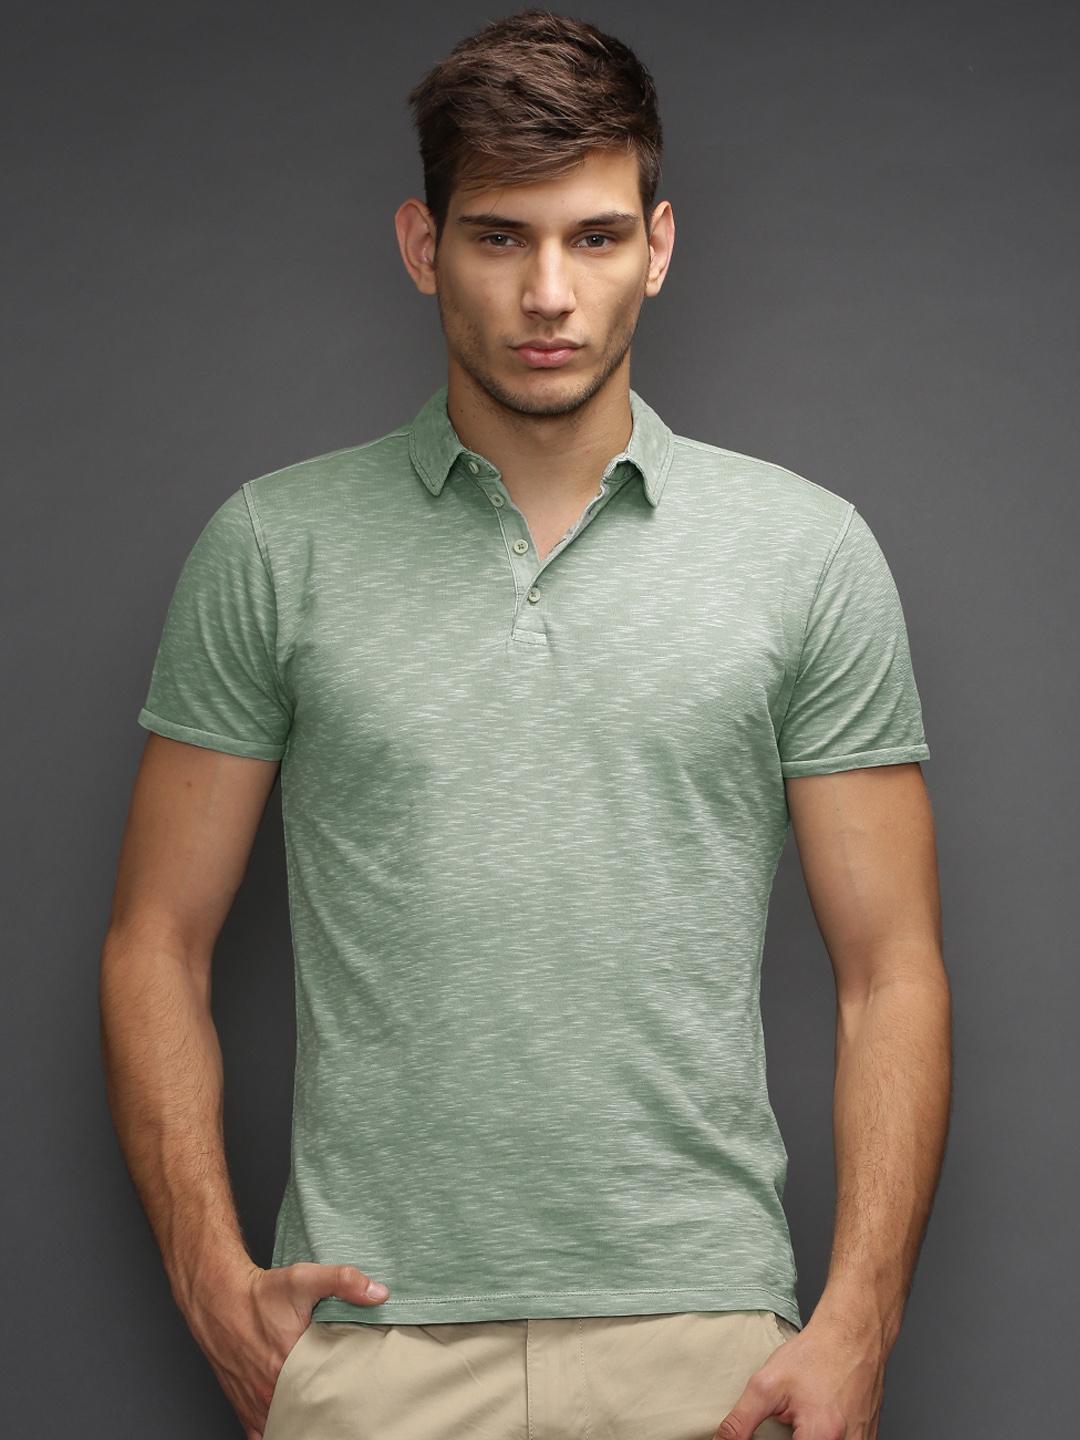 Buy SELECTED Olive Green Polo Pure Cotton T Shirt - Tshirts for Men ...